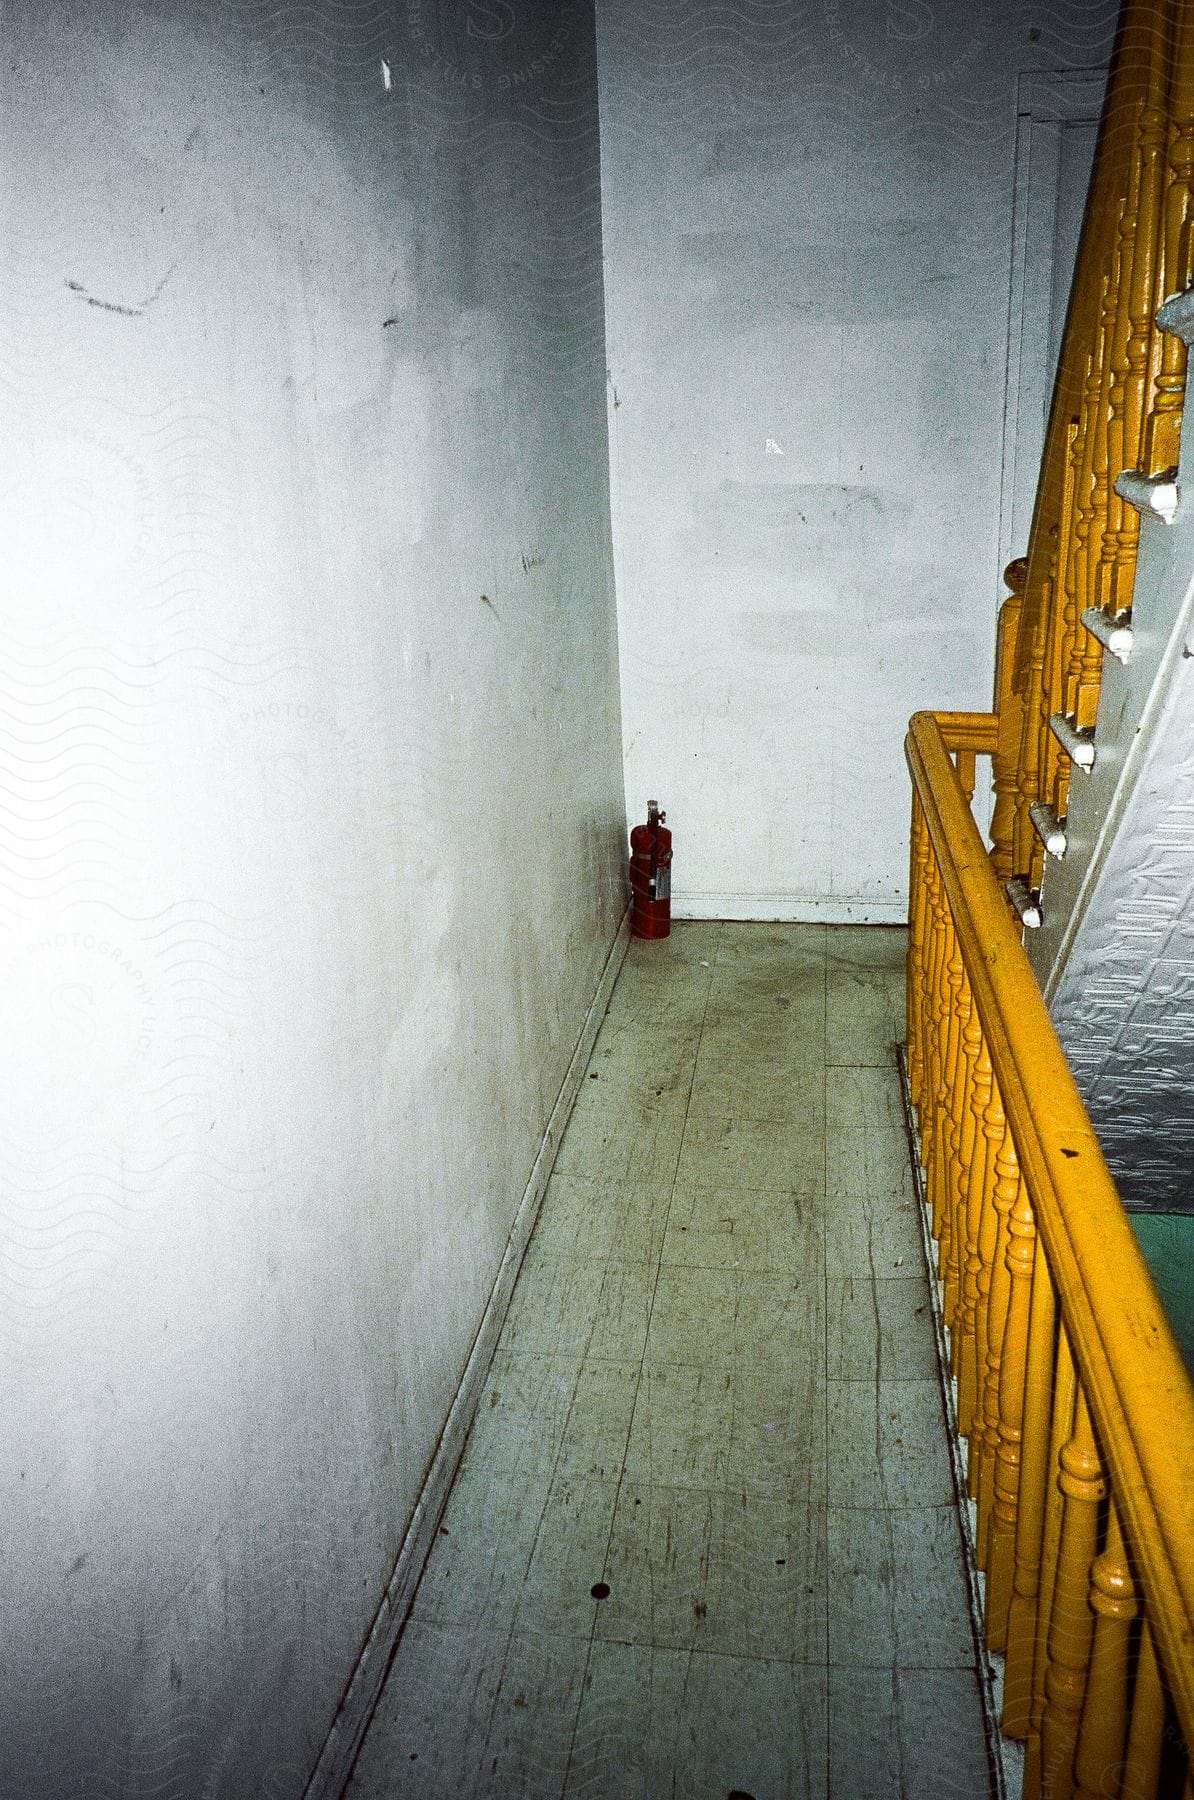 Interior of dark building with stairs with yellow handrail